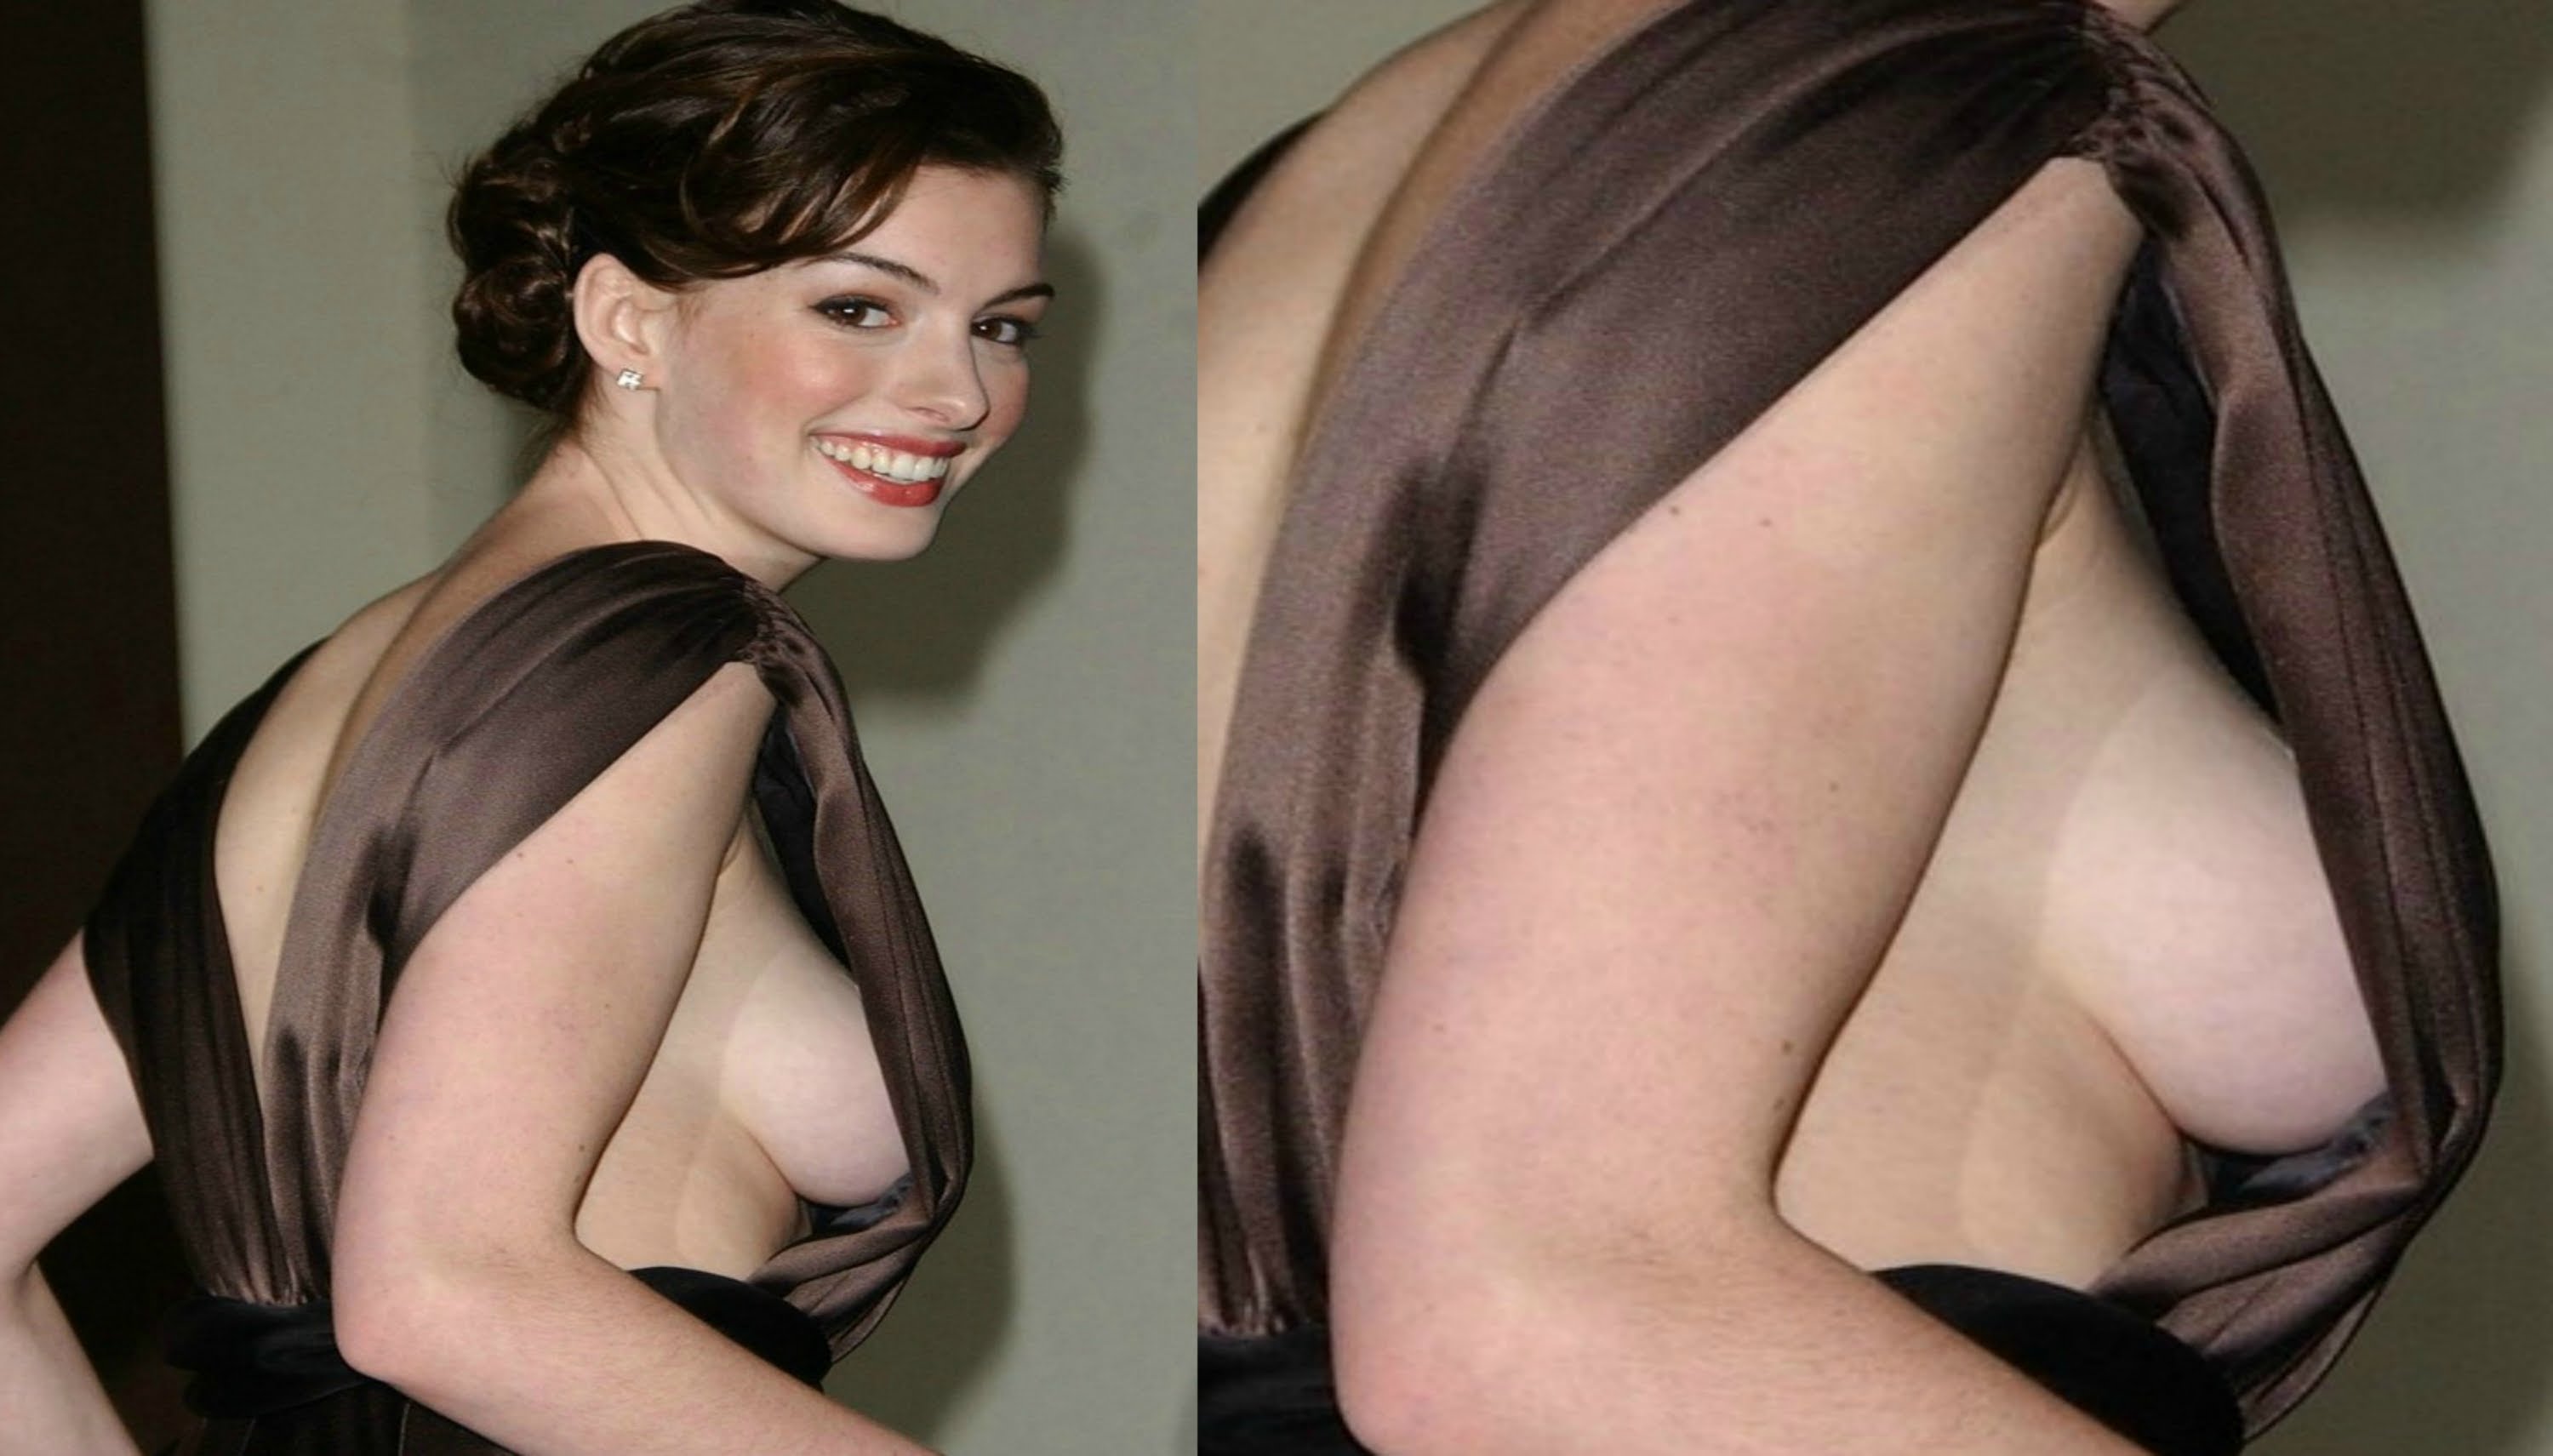 Anne Hathaway Naked Pussy - Anne Hathaway Nude Pictures. Rating = 9.09/10